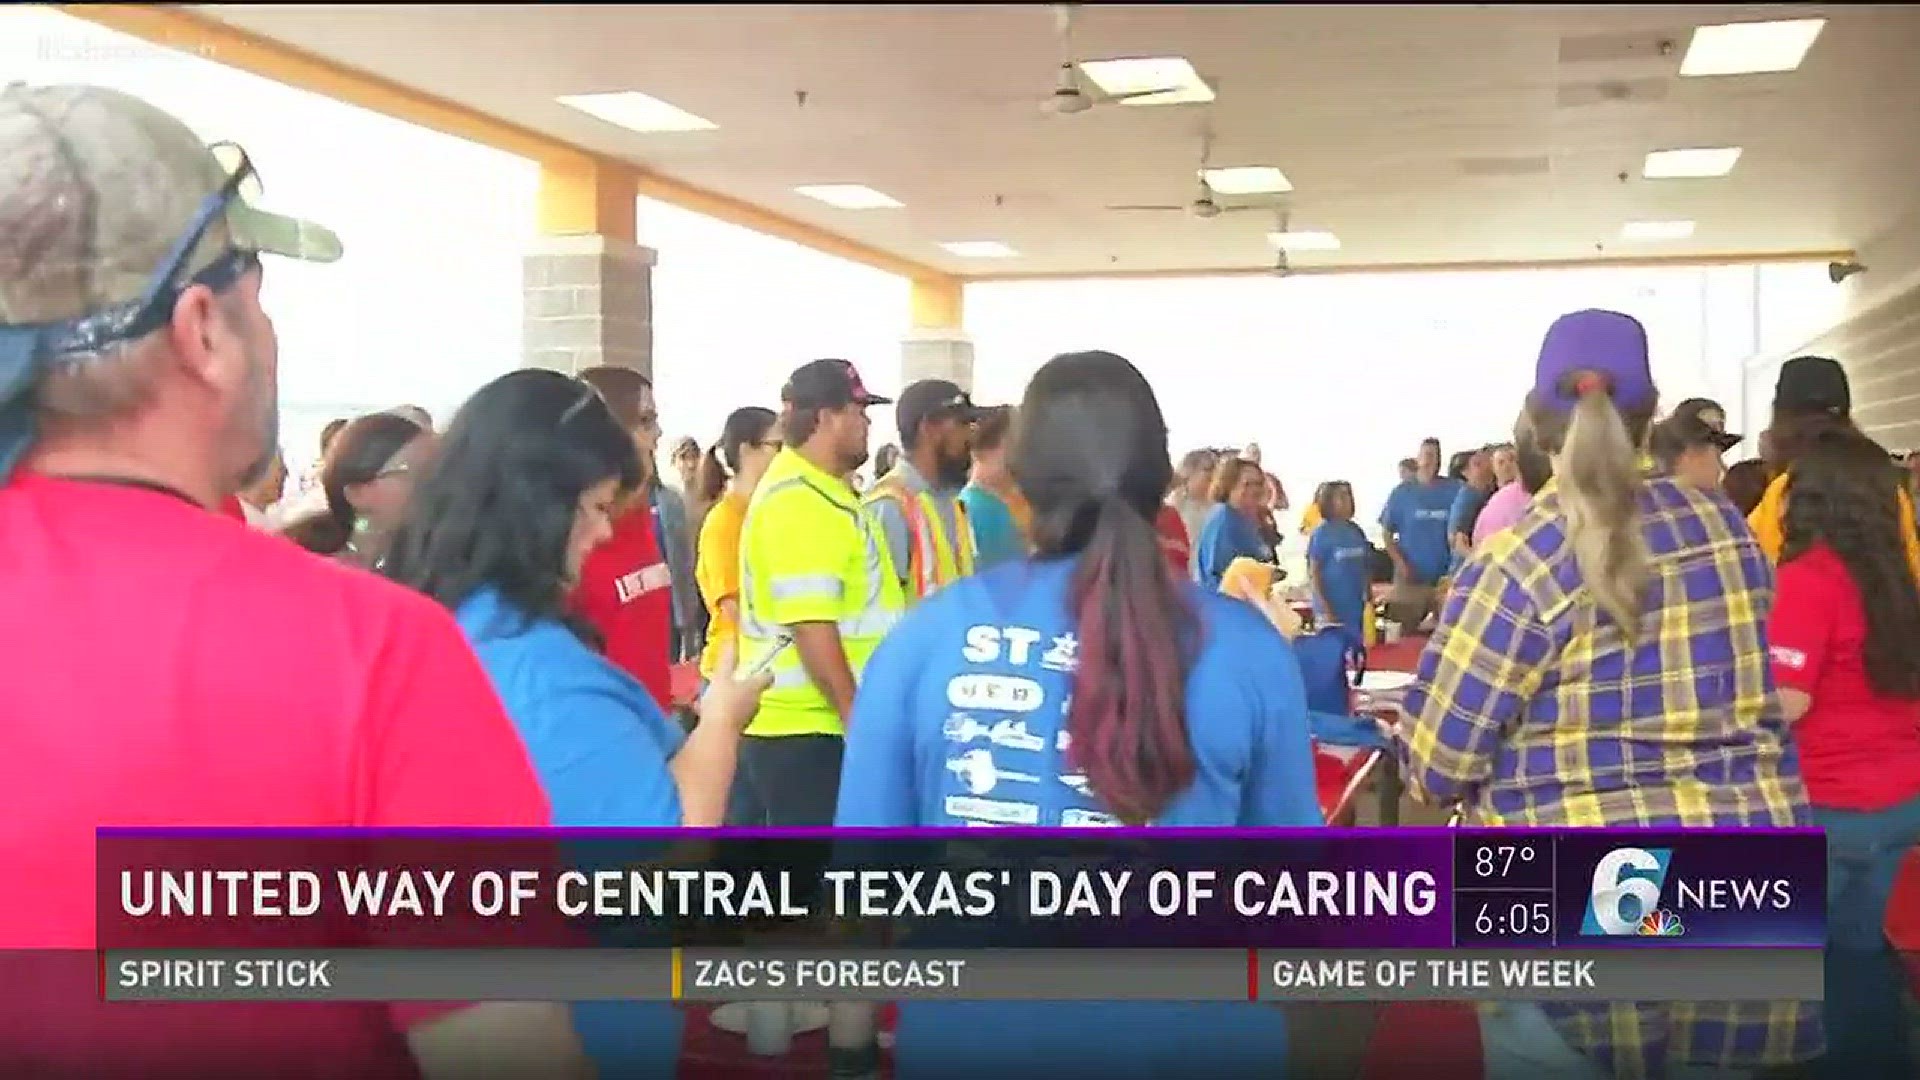 United Way of Central Texas' day of caring